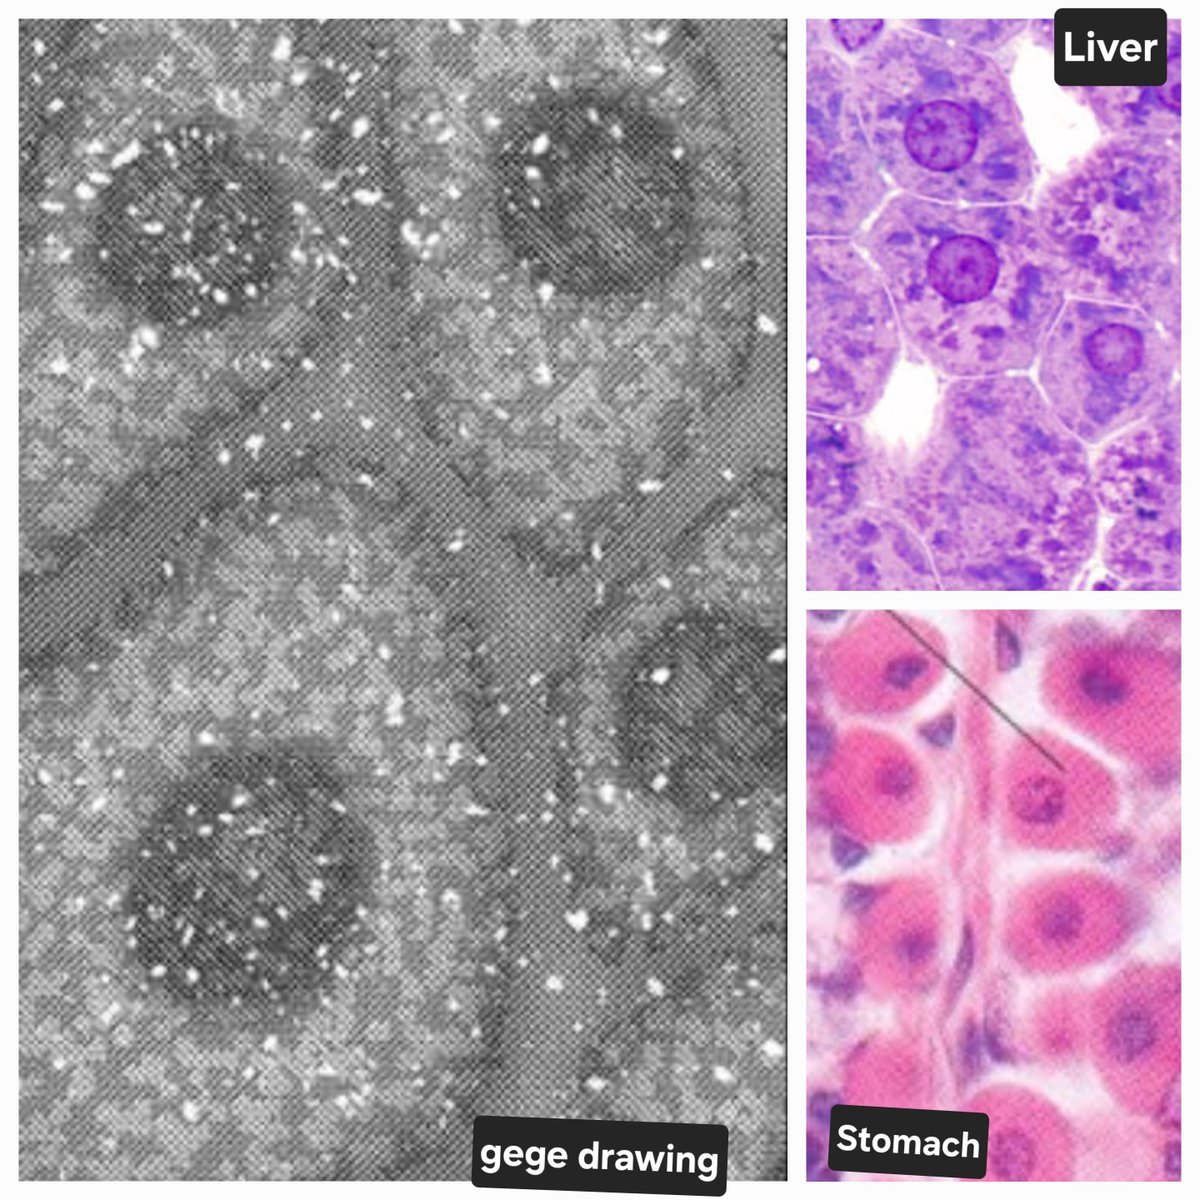 Liver? Stomach? These cells from chapter 258 require a review of histology hehe
Without going deeper, they look like liver cells (hepatocytes) 😅

#jjk258 #JujutsuKaisen